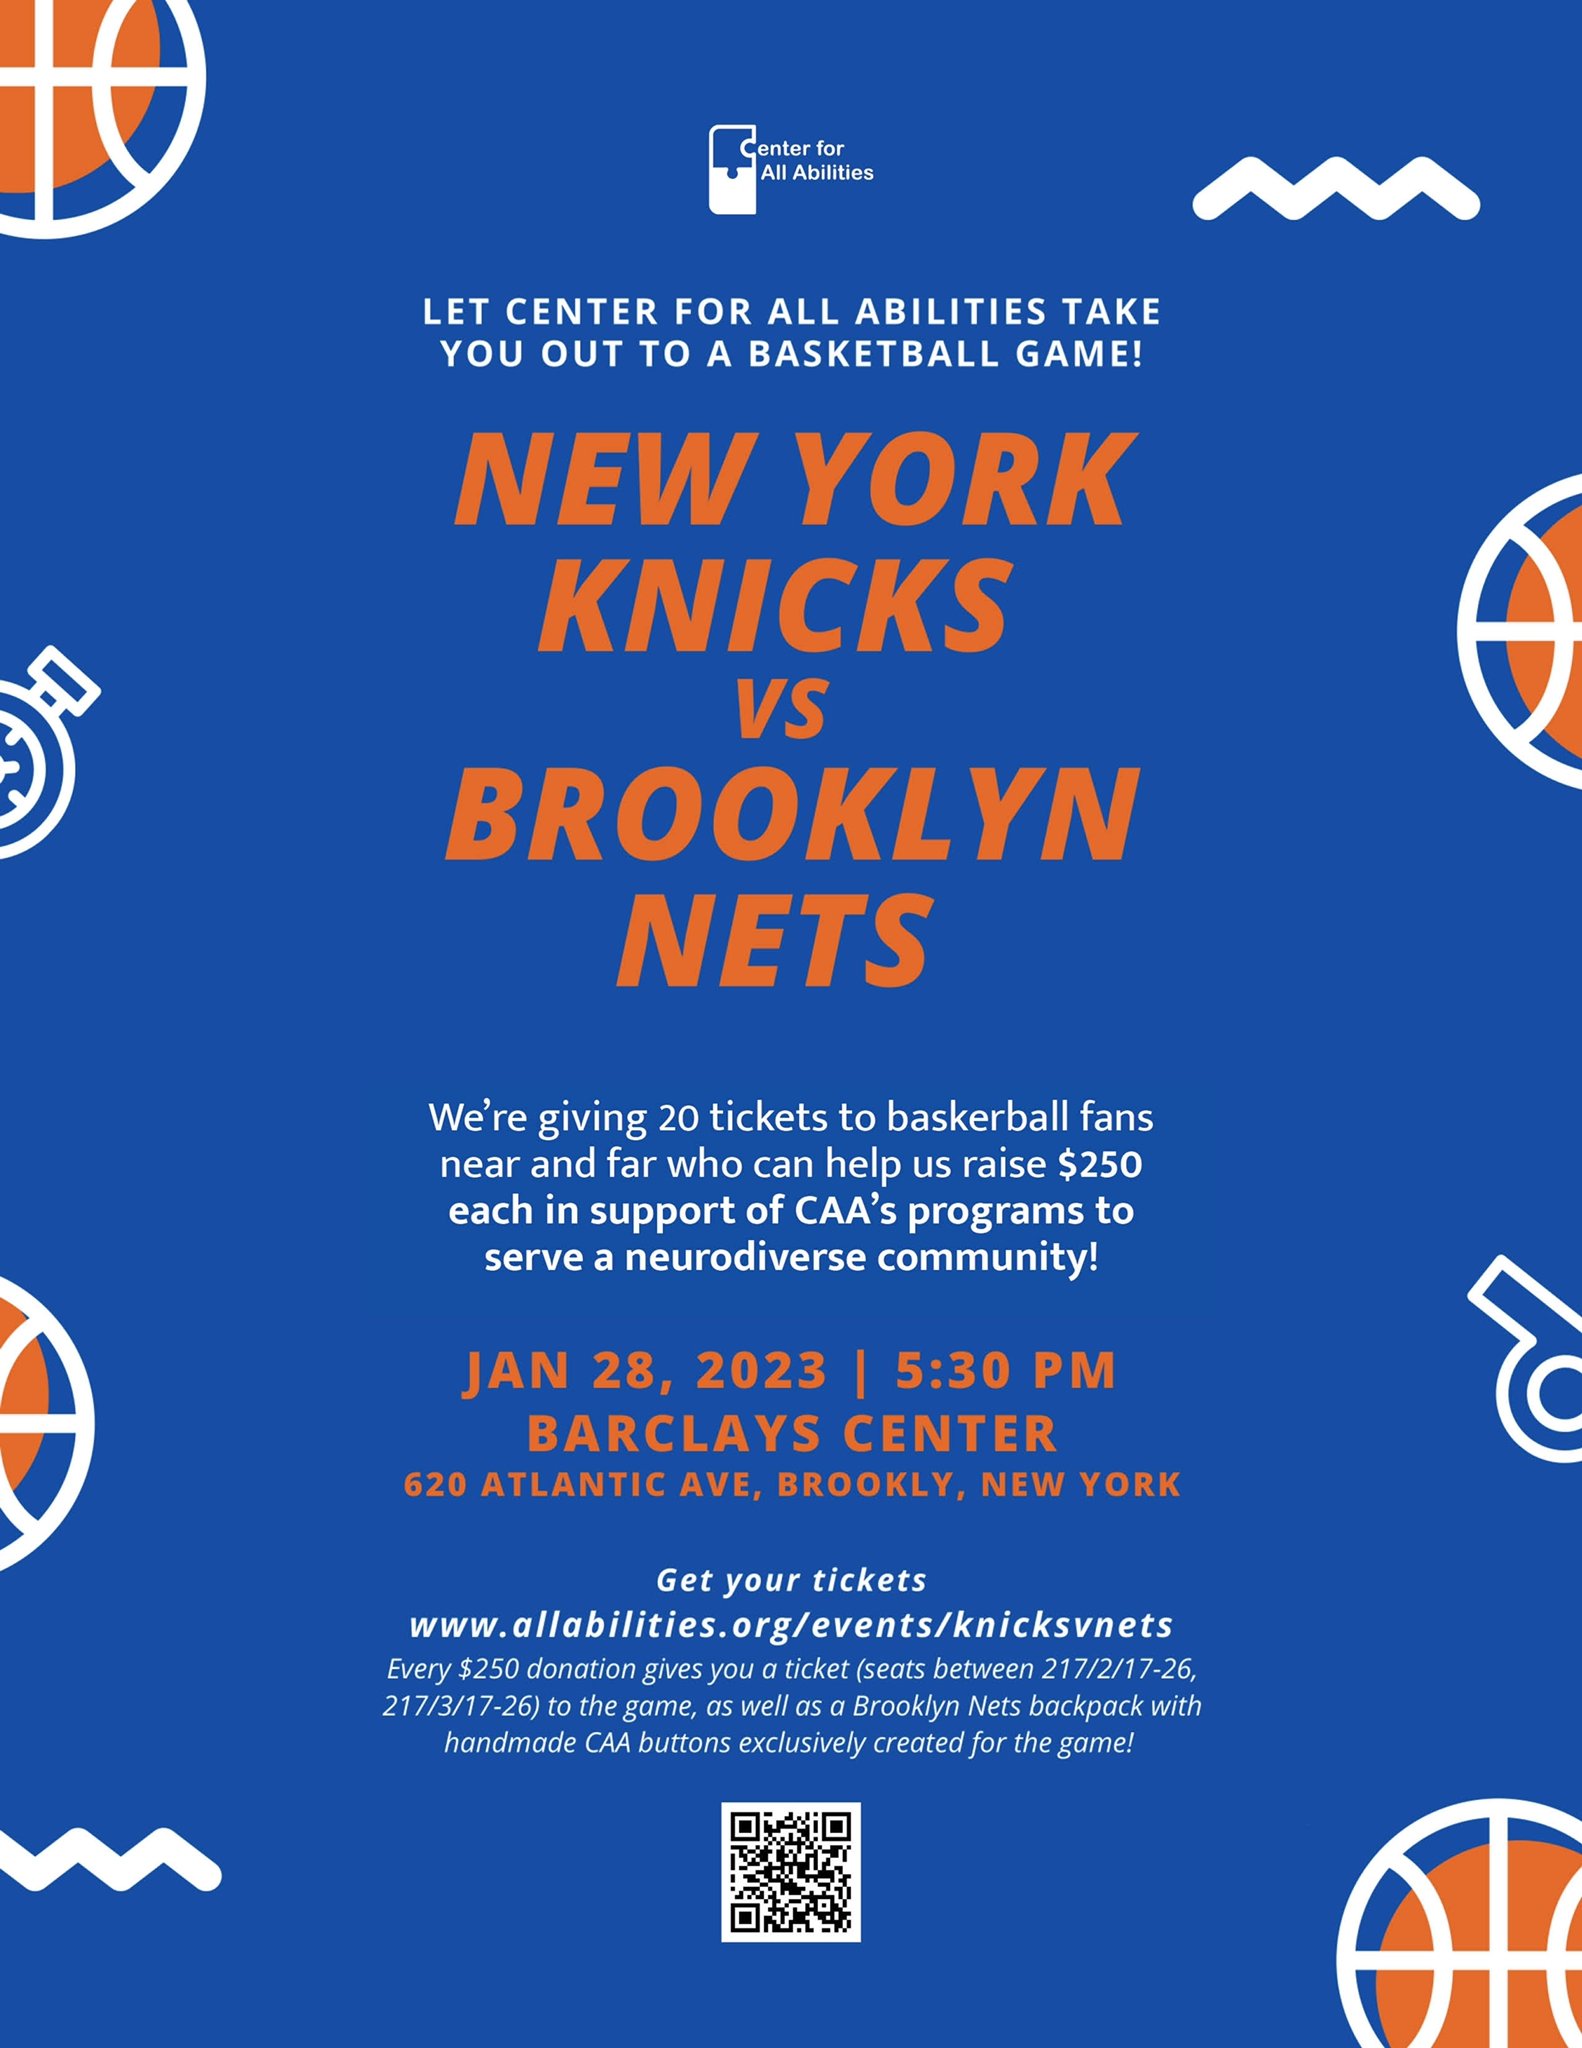 NBA Basketball Game Tickets in NYC 2023